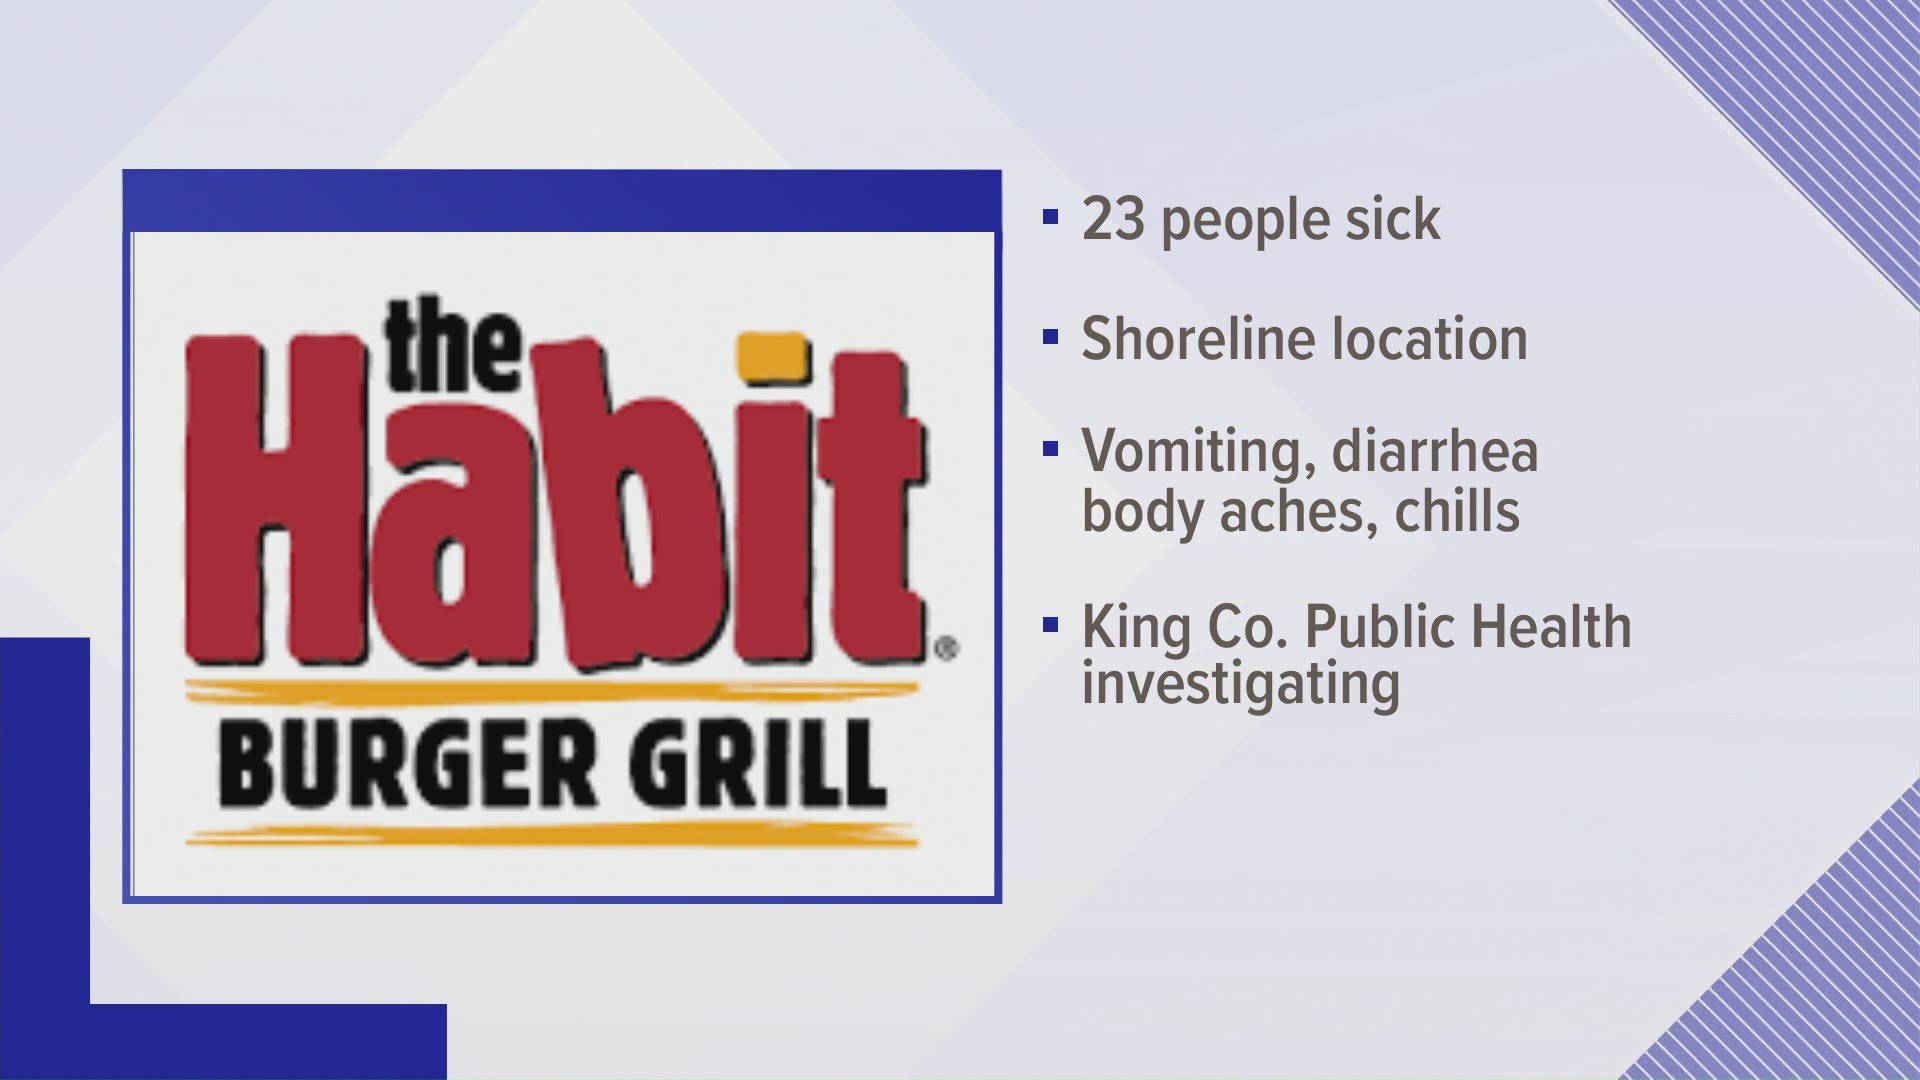 Health officials say 23 people have reported becoming sick with norovirus-like illness after eating from the Habit Burger Grill in Shoreline.